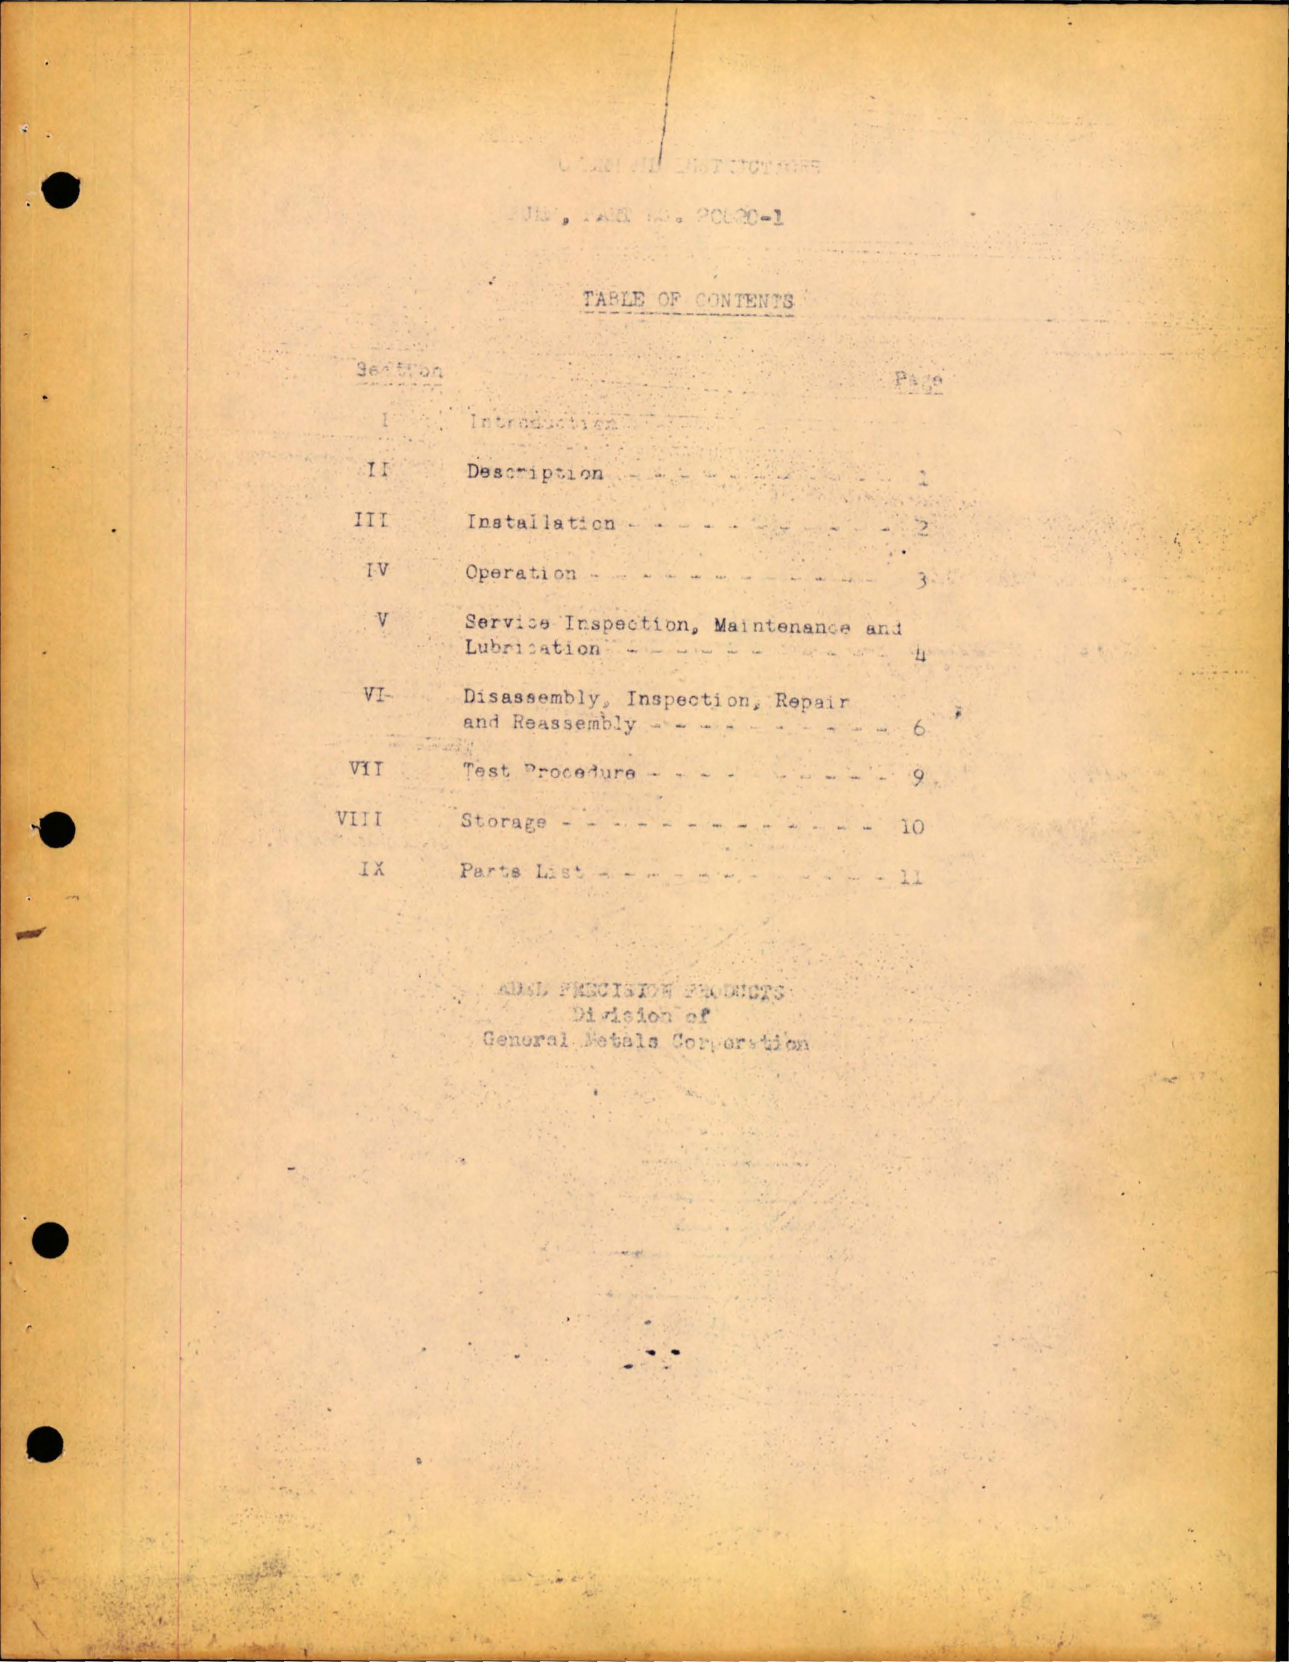 Sample page 1 from AirCorps Library document: Maintenance and Service with Parts Catalog for Fluid Metering Pump - Model 20820-1